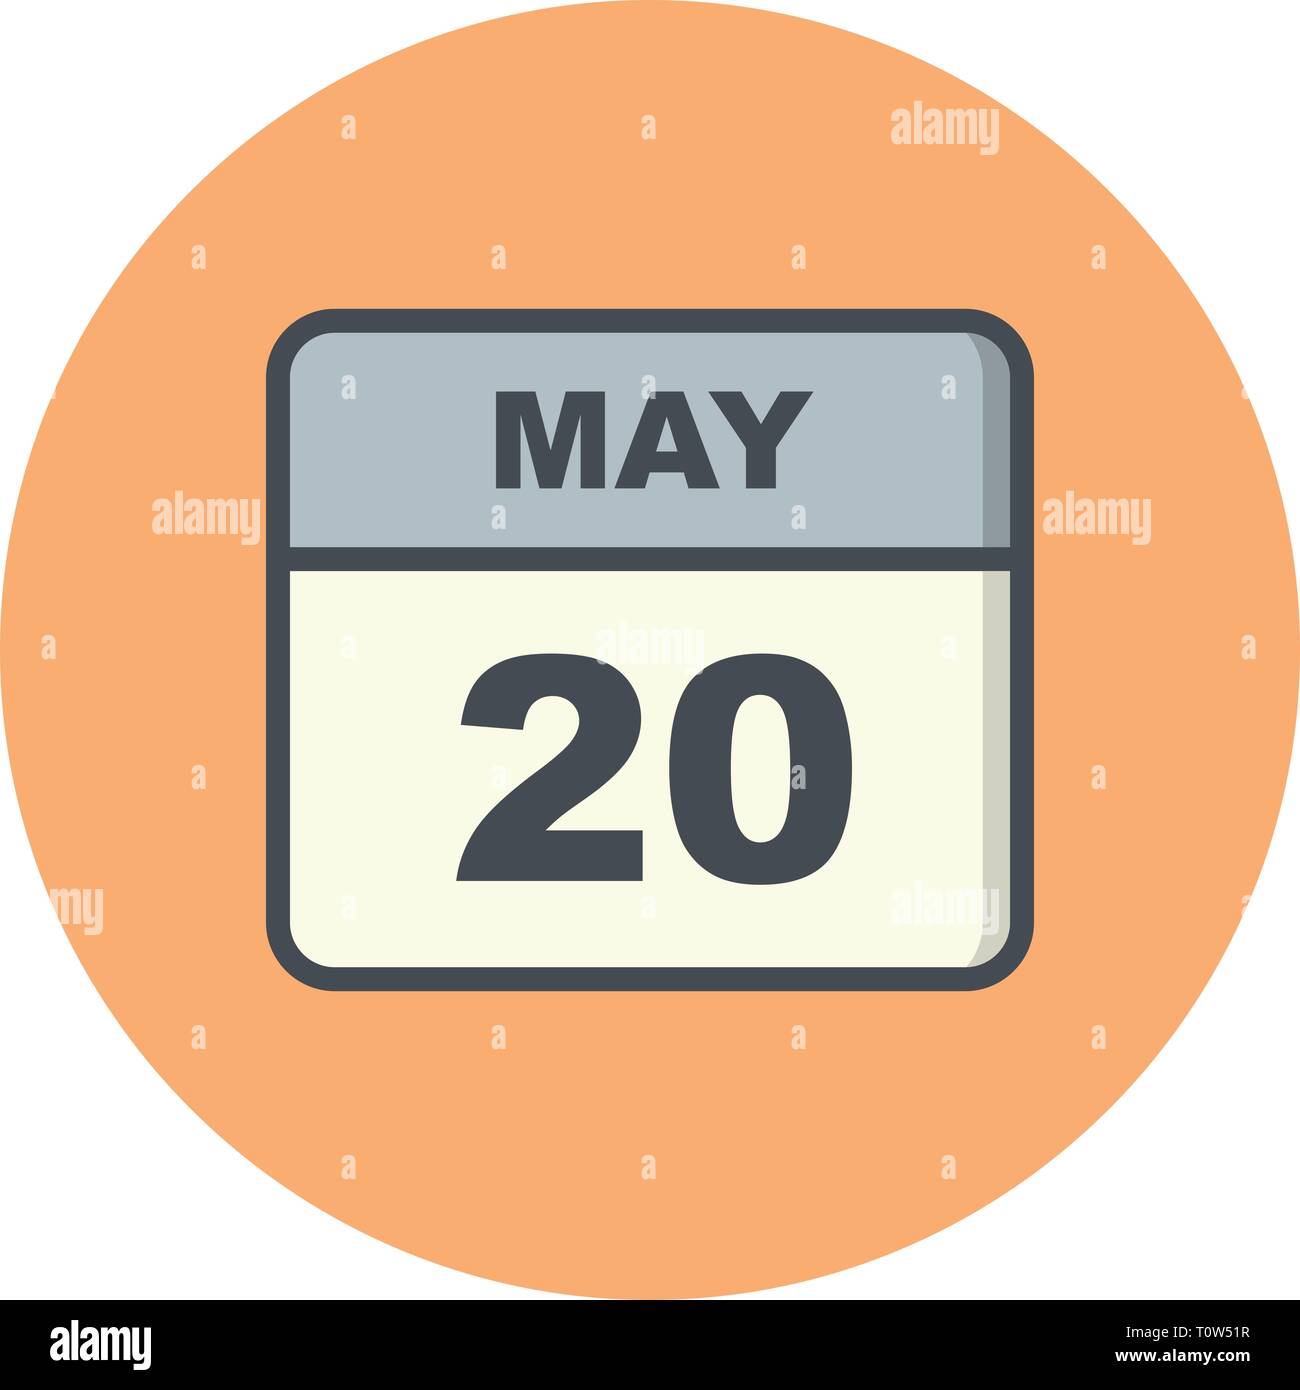 May 20th Date On A Single Day Calendar Stock Photo Alamy